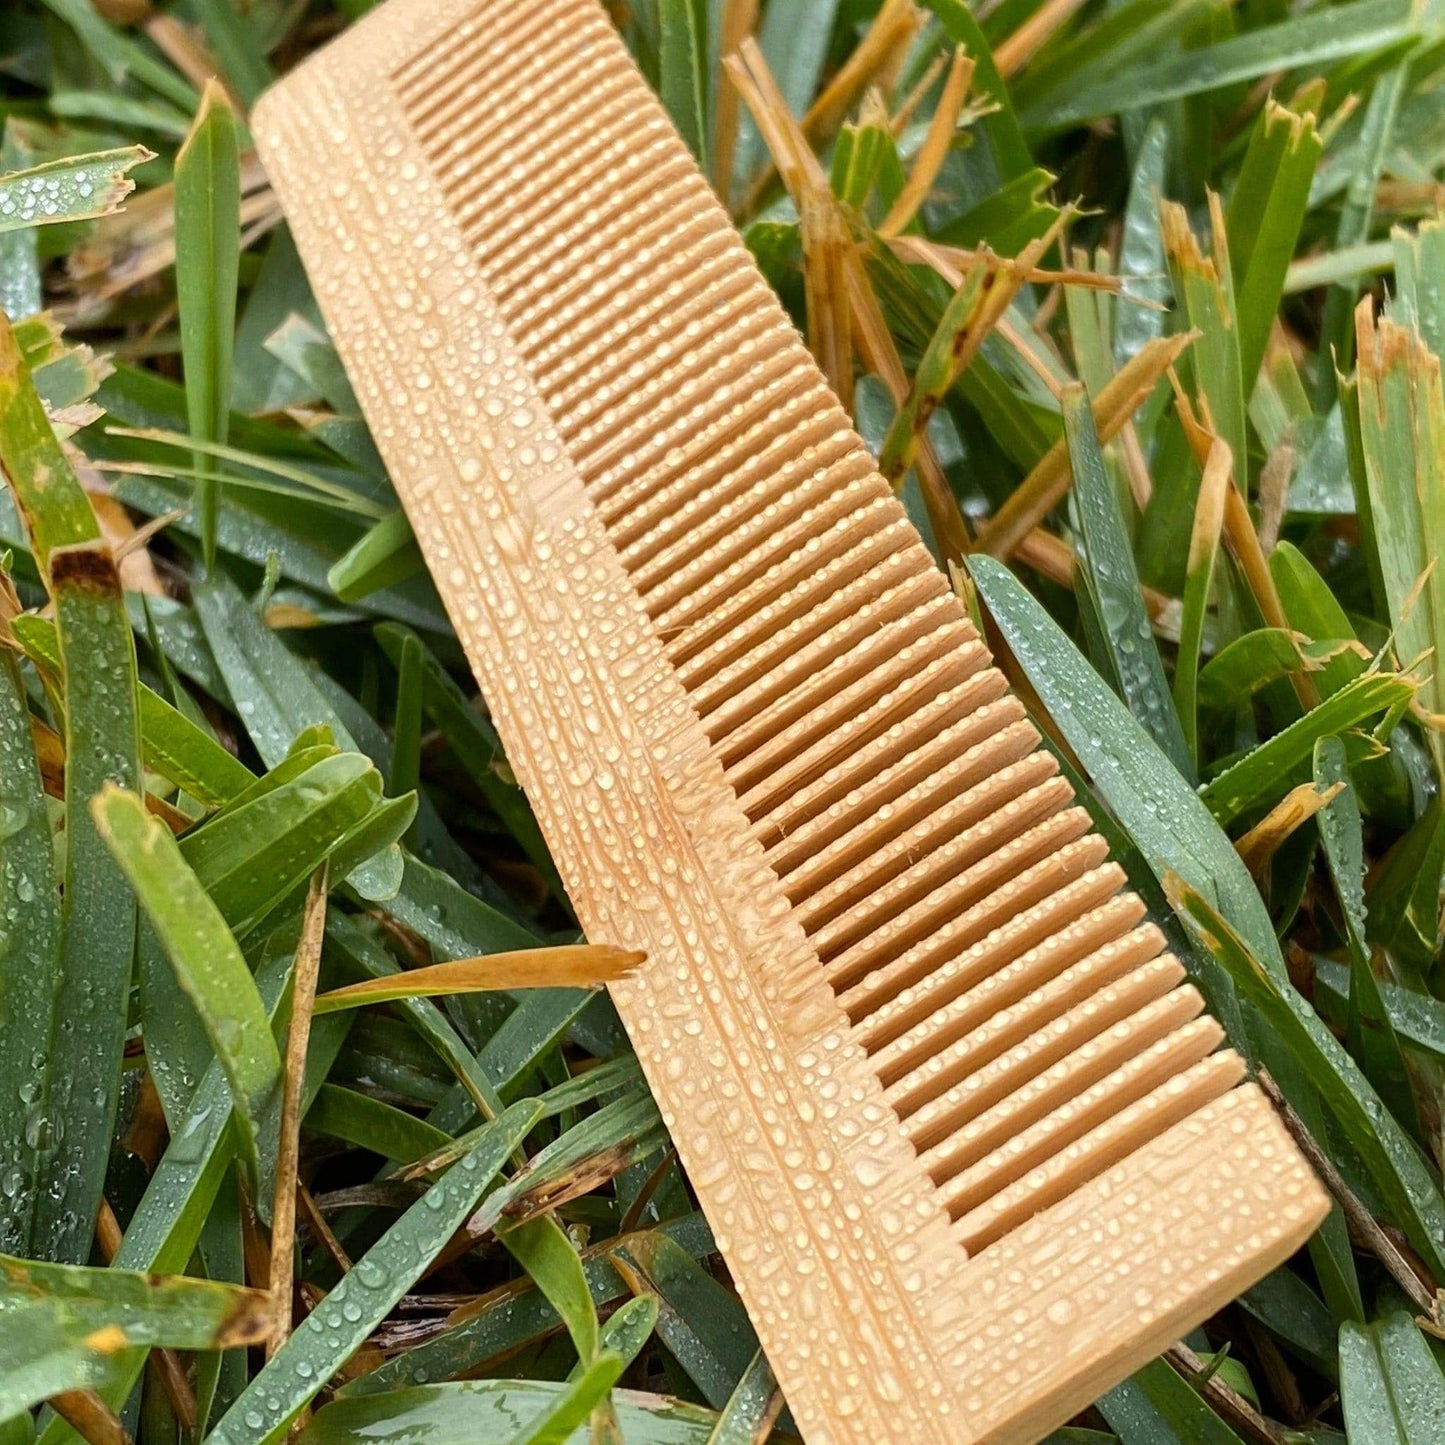 Pure Skin 2 in 1 Beard and Hair Styling Comb